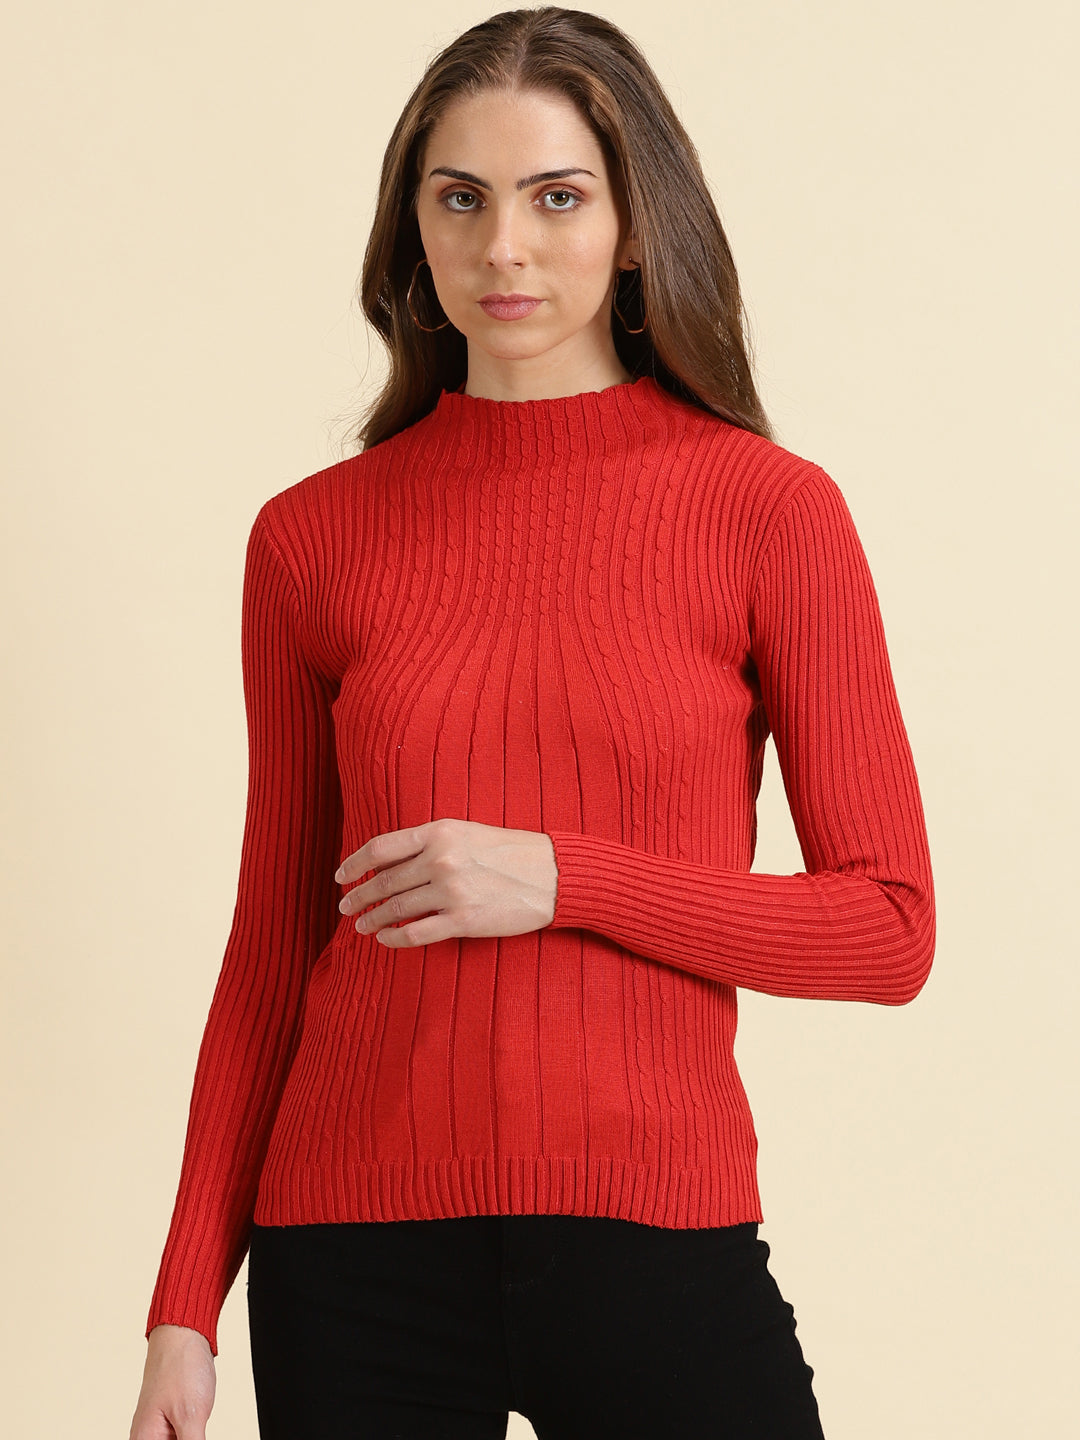 Women's Red Solid Fitted Top